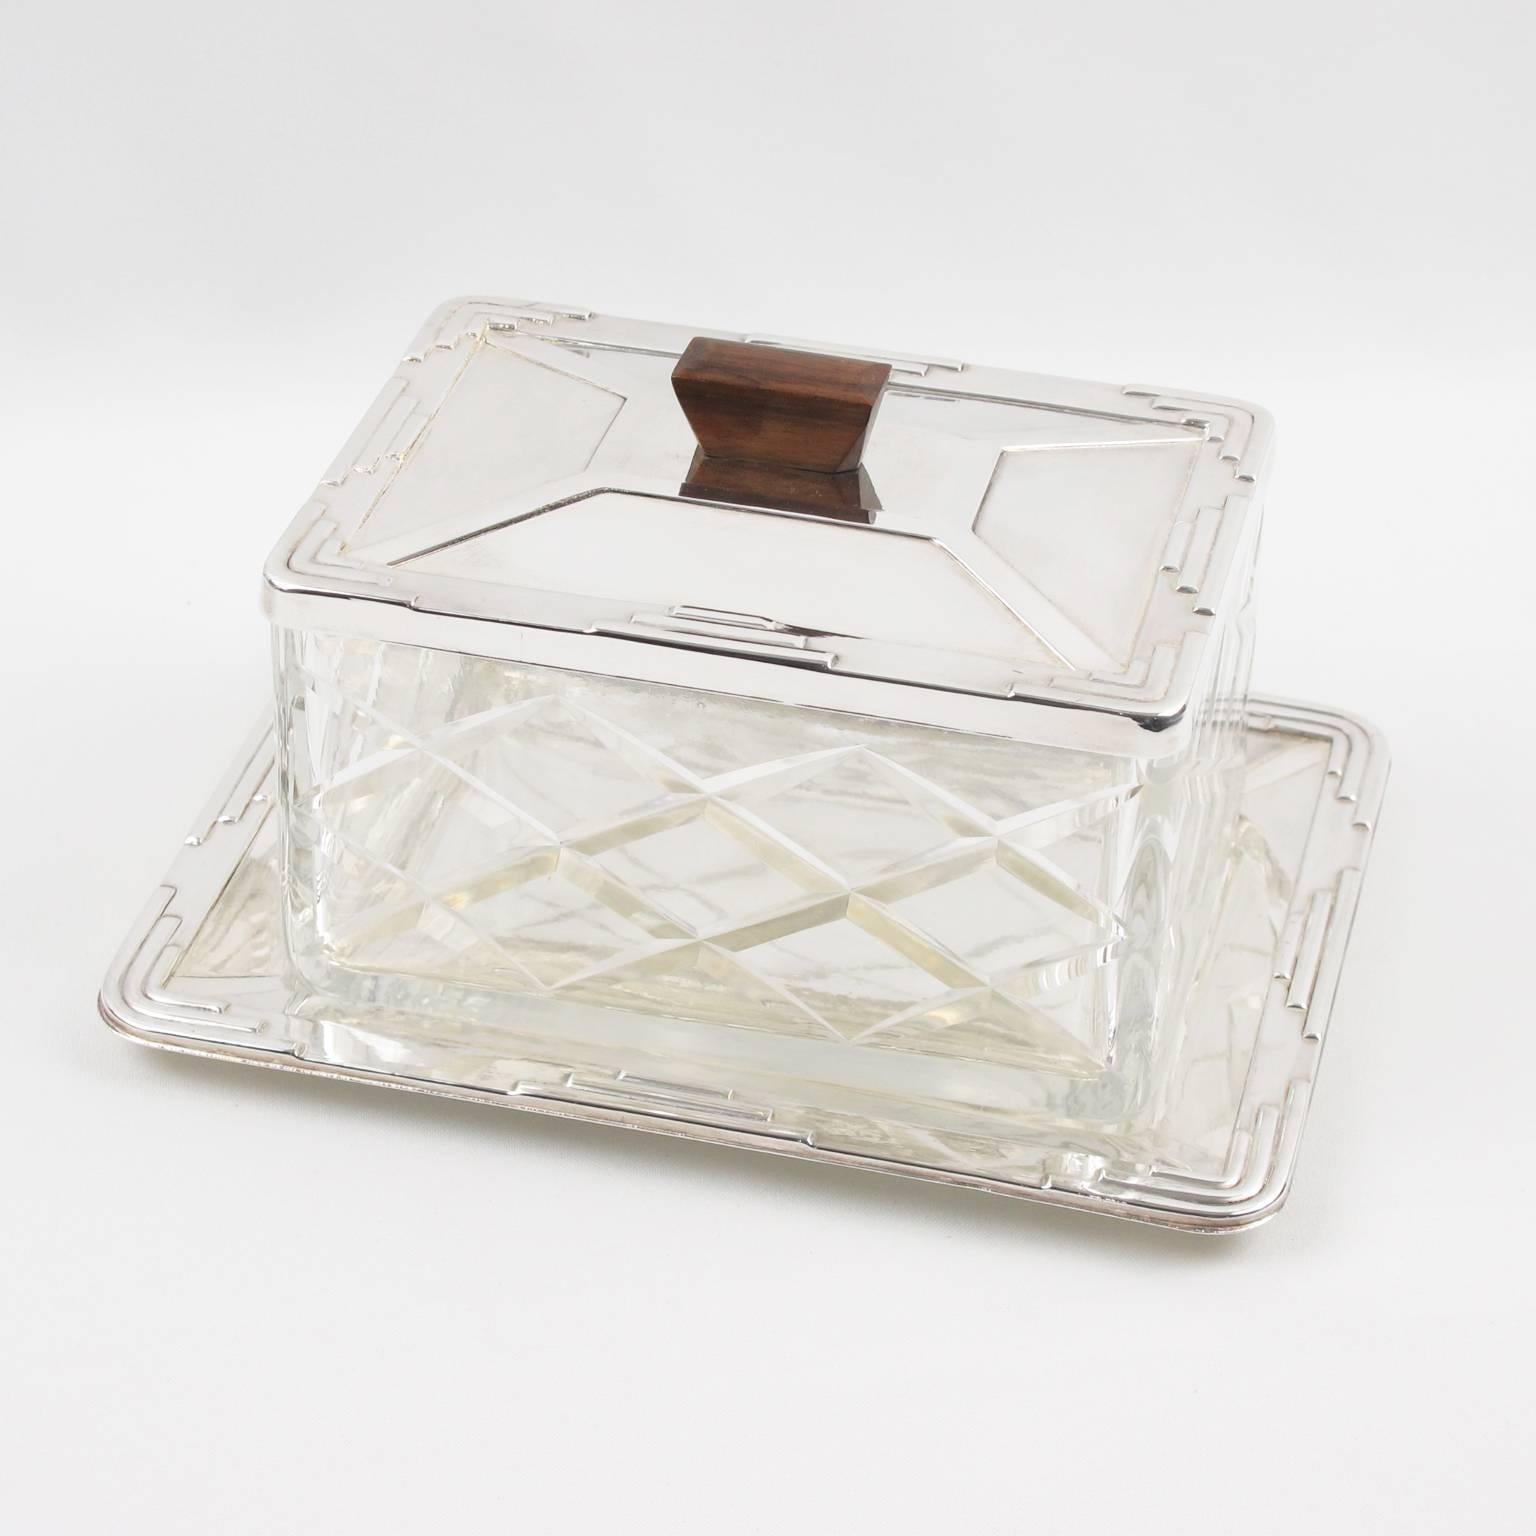 Elegant vintage French Art Deco silver plate and crystal decorative cookie box by Silversmith Rondeau, Paris, circa 1930s. Modernist Minimalist design with metal tray holder base and lid, ornate with geometric detailing. Crystal cut insert bowl with